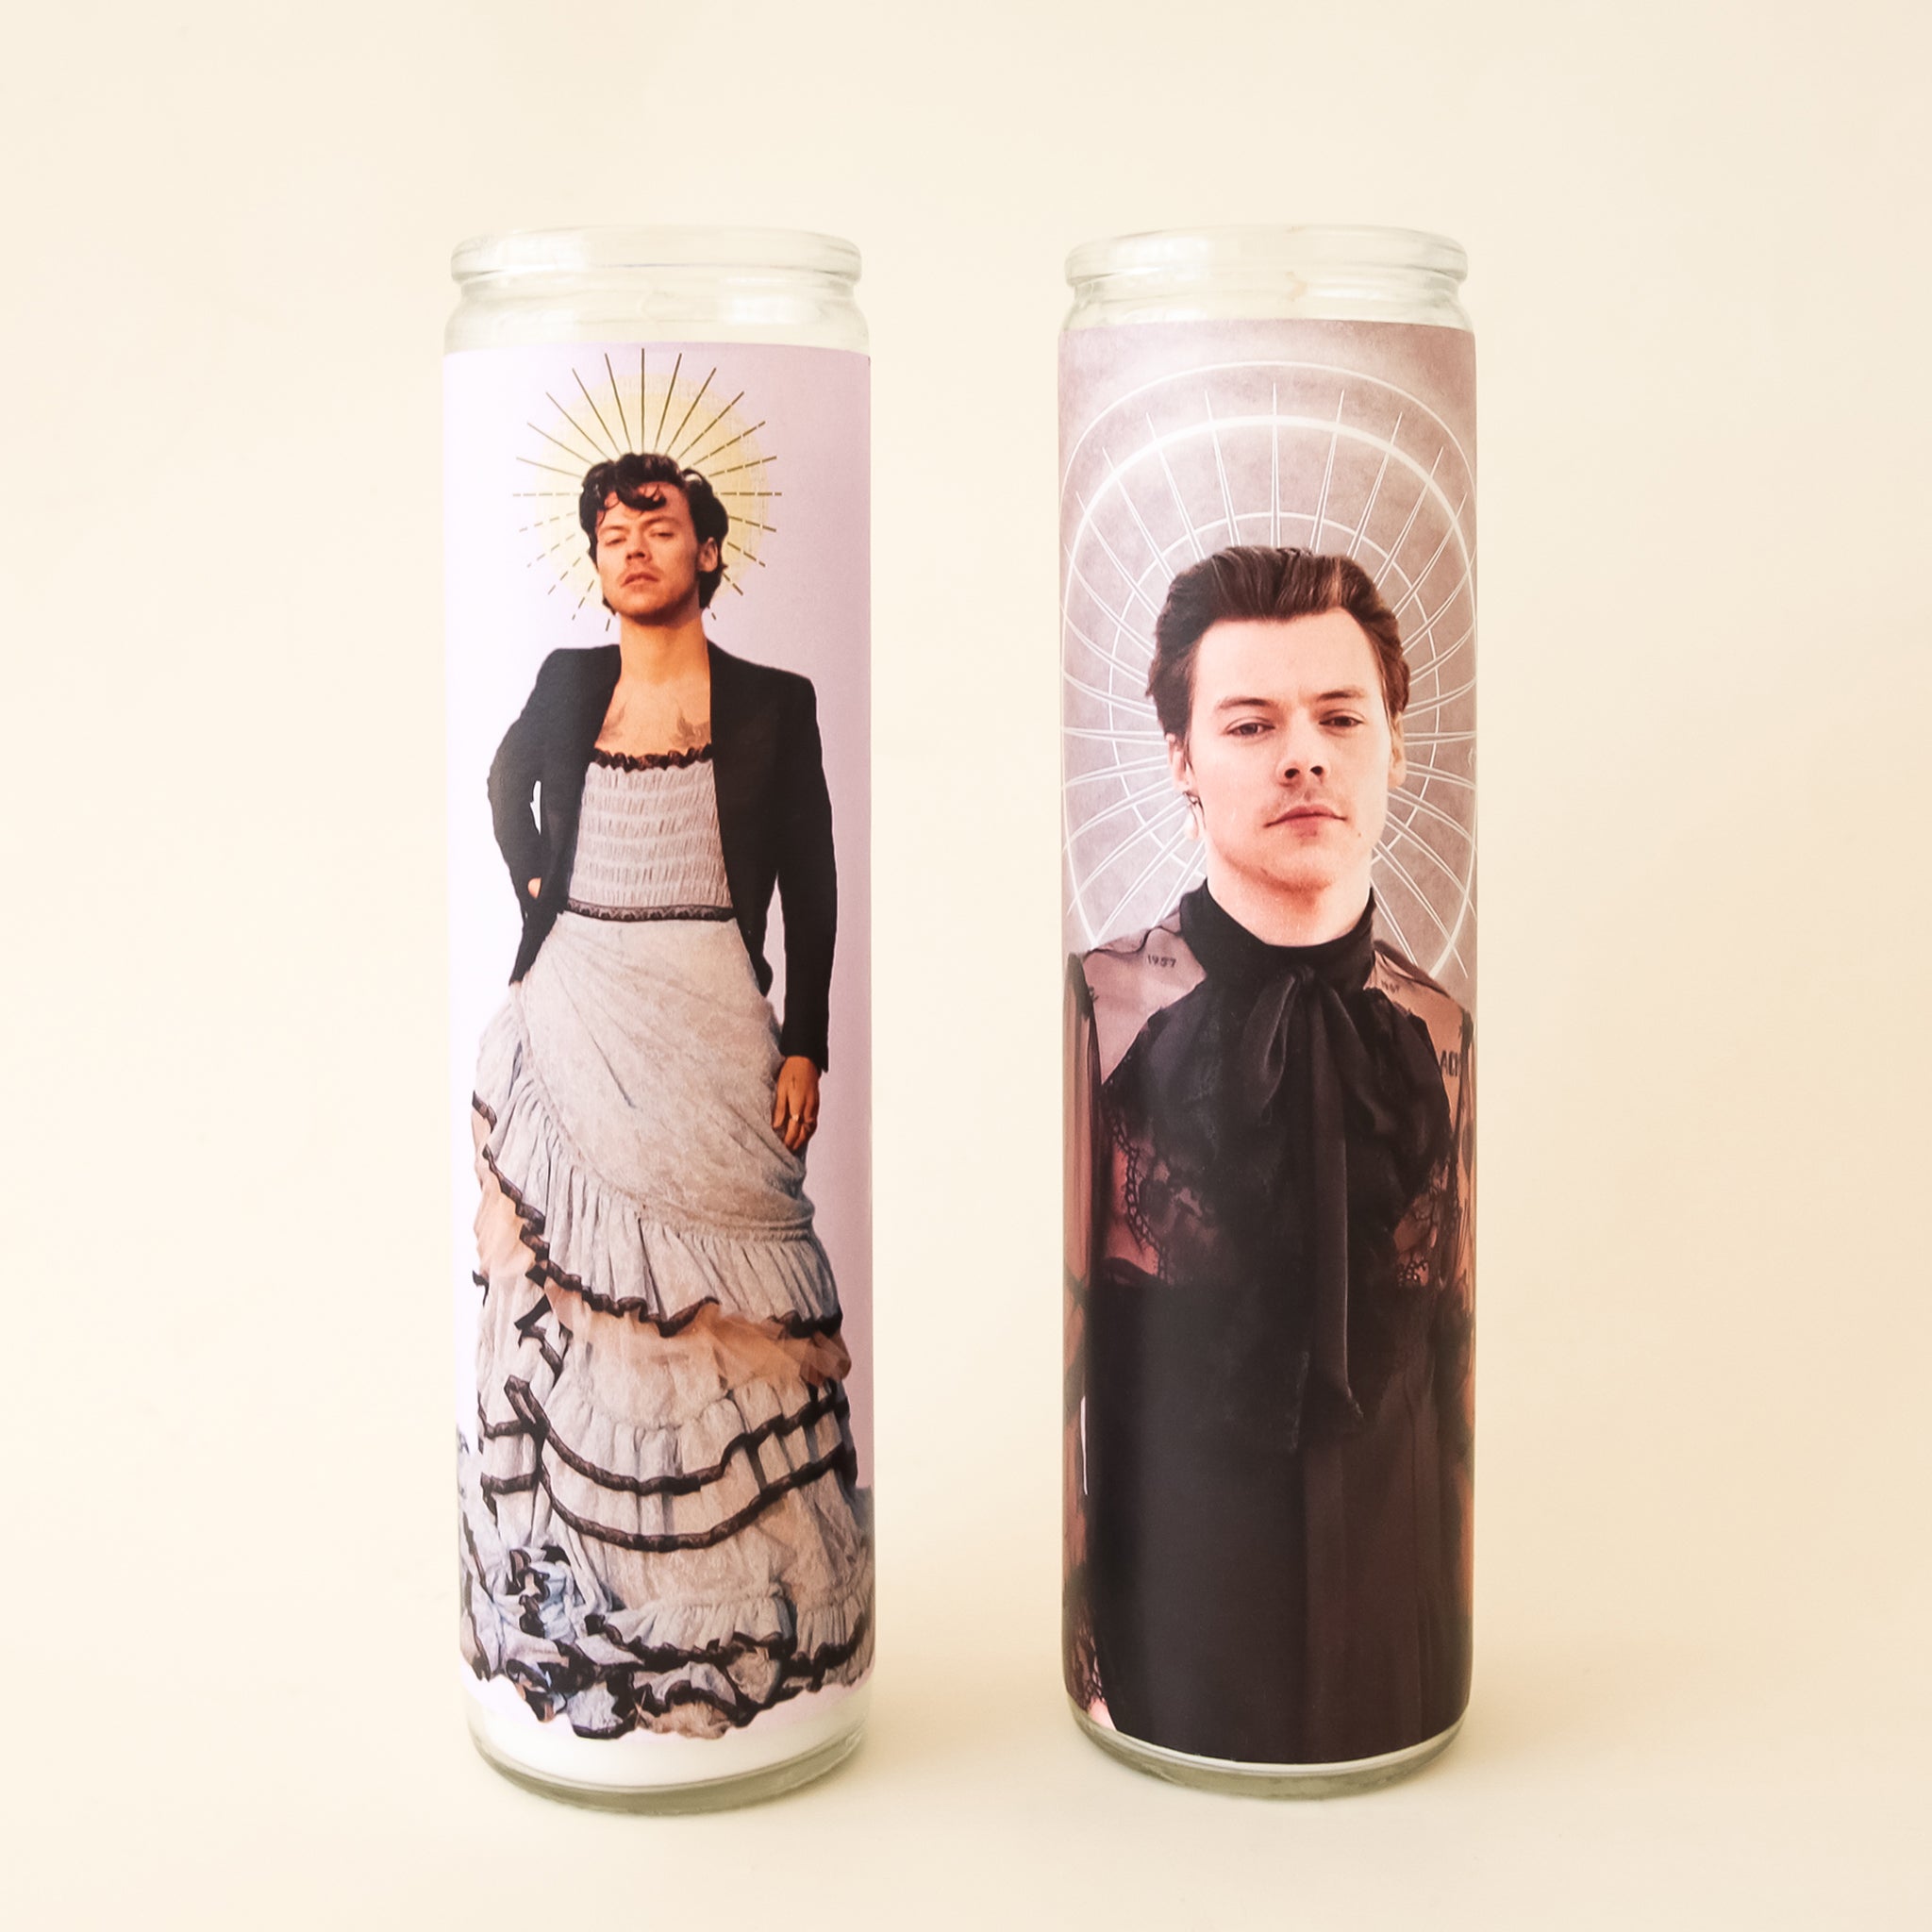 Two Harry Styles prayer candles that are available on our site. One being the photo of Harry in ruffle dress and the other when he is wearing a black lace top. 